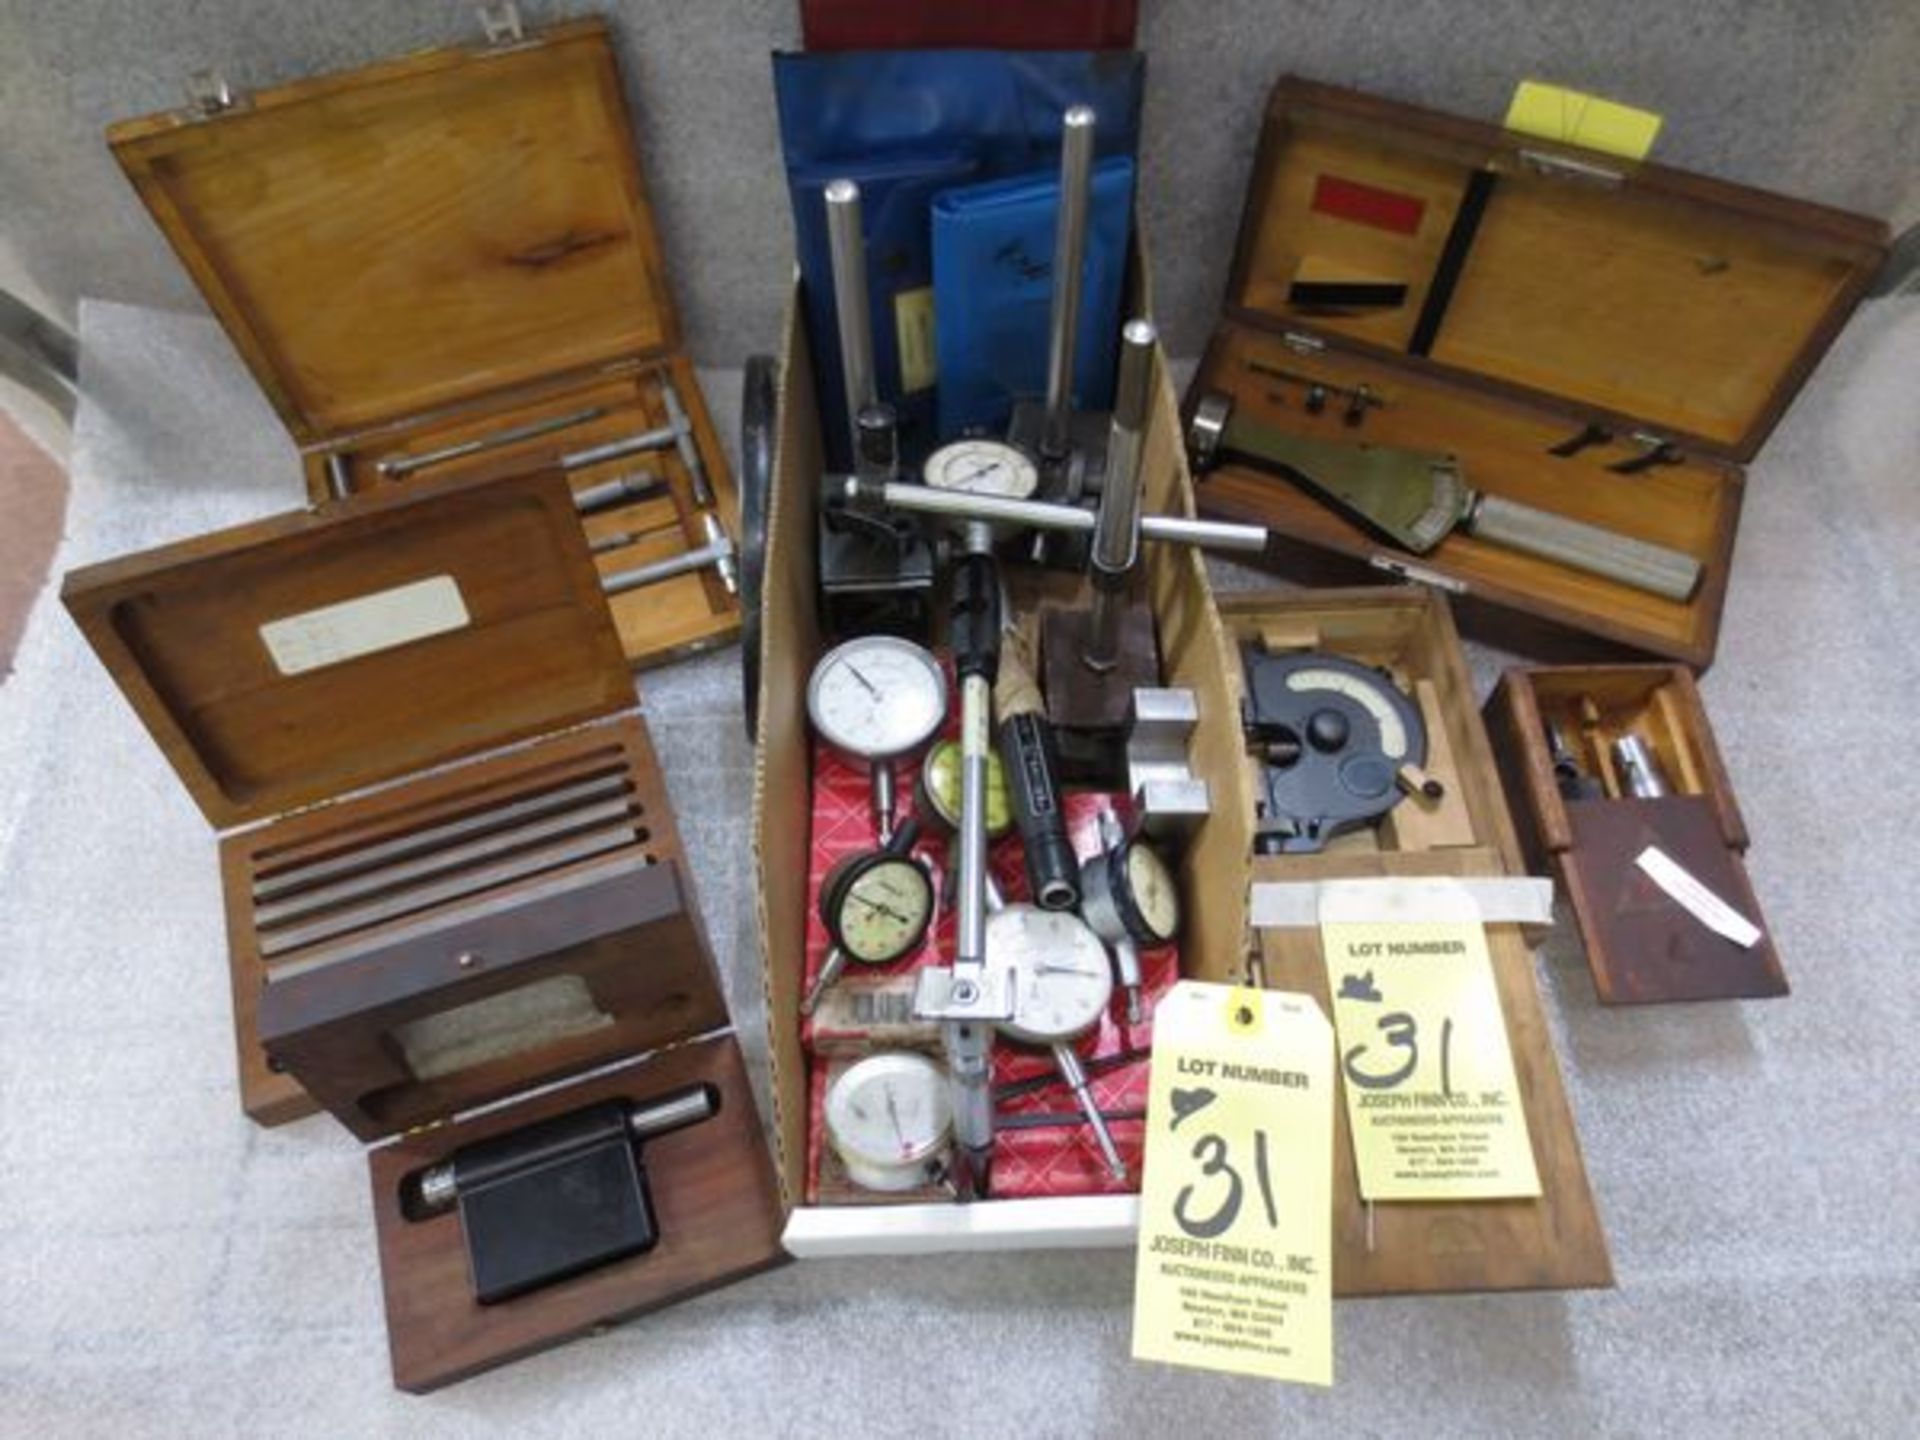 DIAL GAGES, MAG STANDS, DRILL POINT GAGES, ZEISS GAGE, OPTICAL LOCATOR, SWEDISH 2 - 3" GAGE,